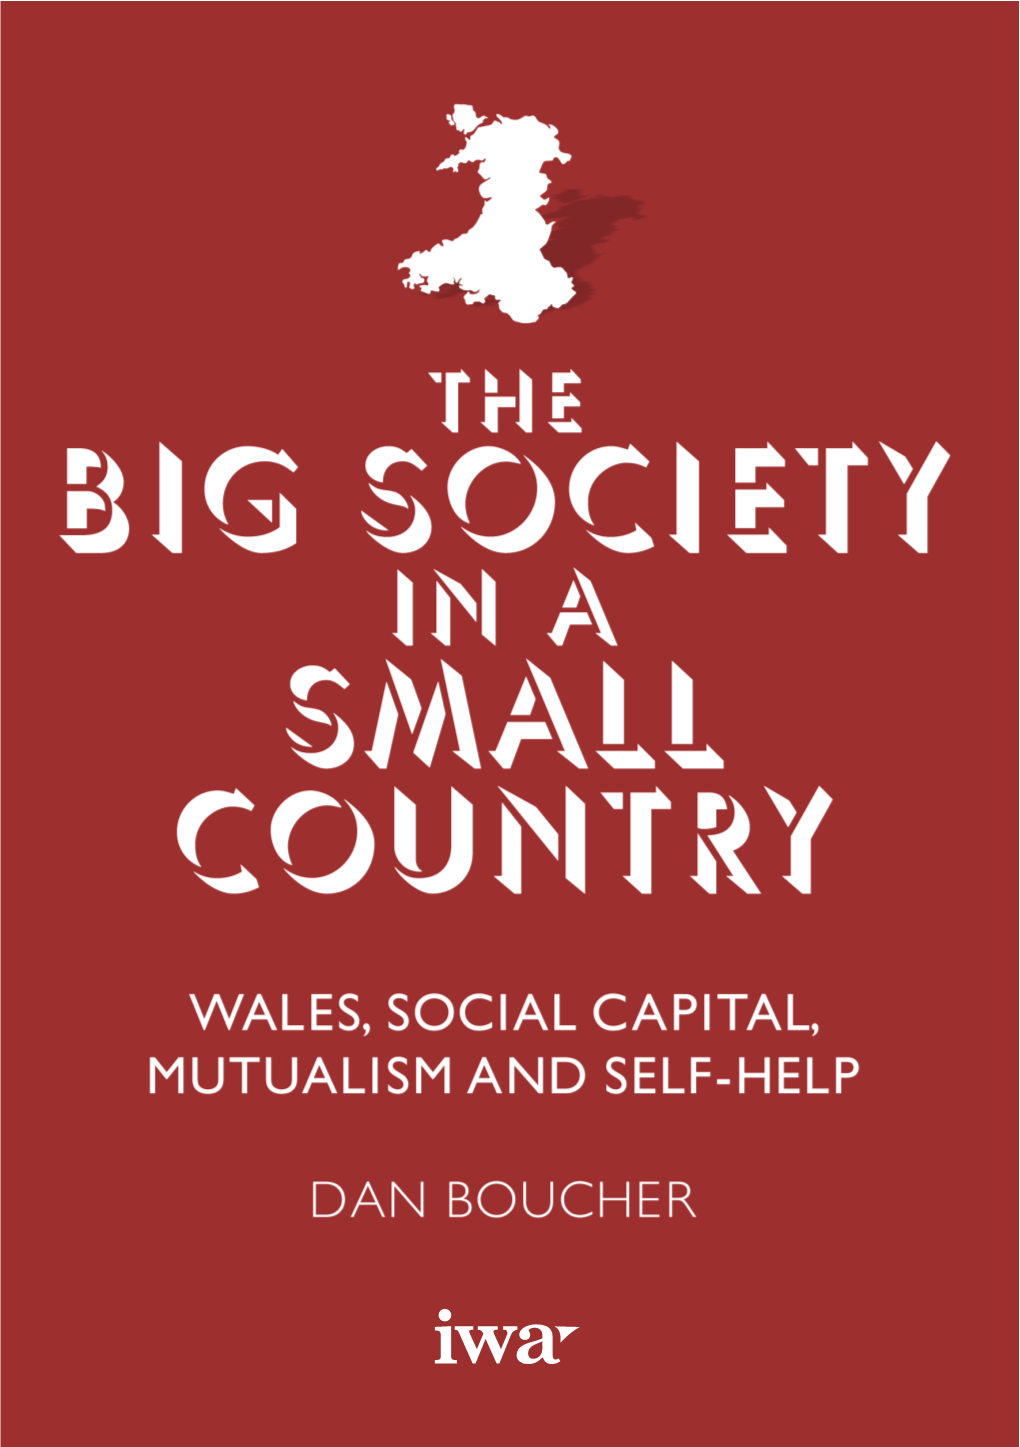 The Big Society in a Small Country